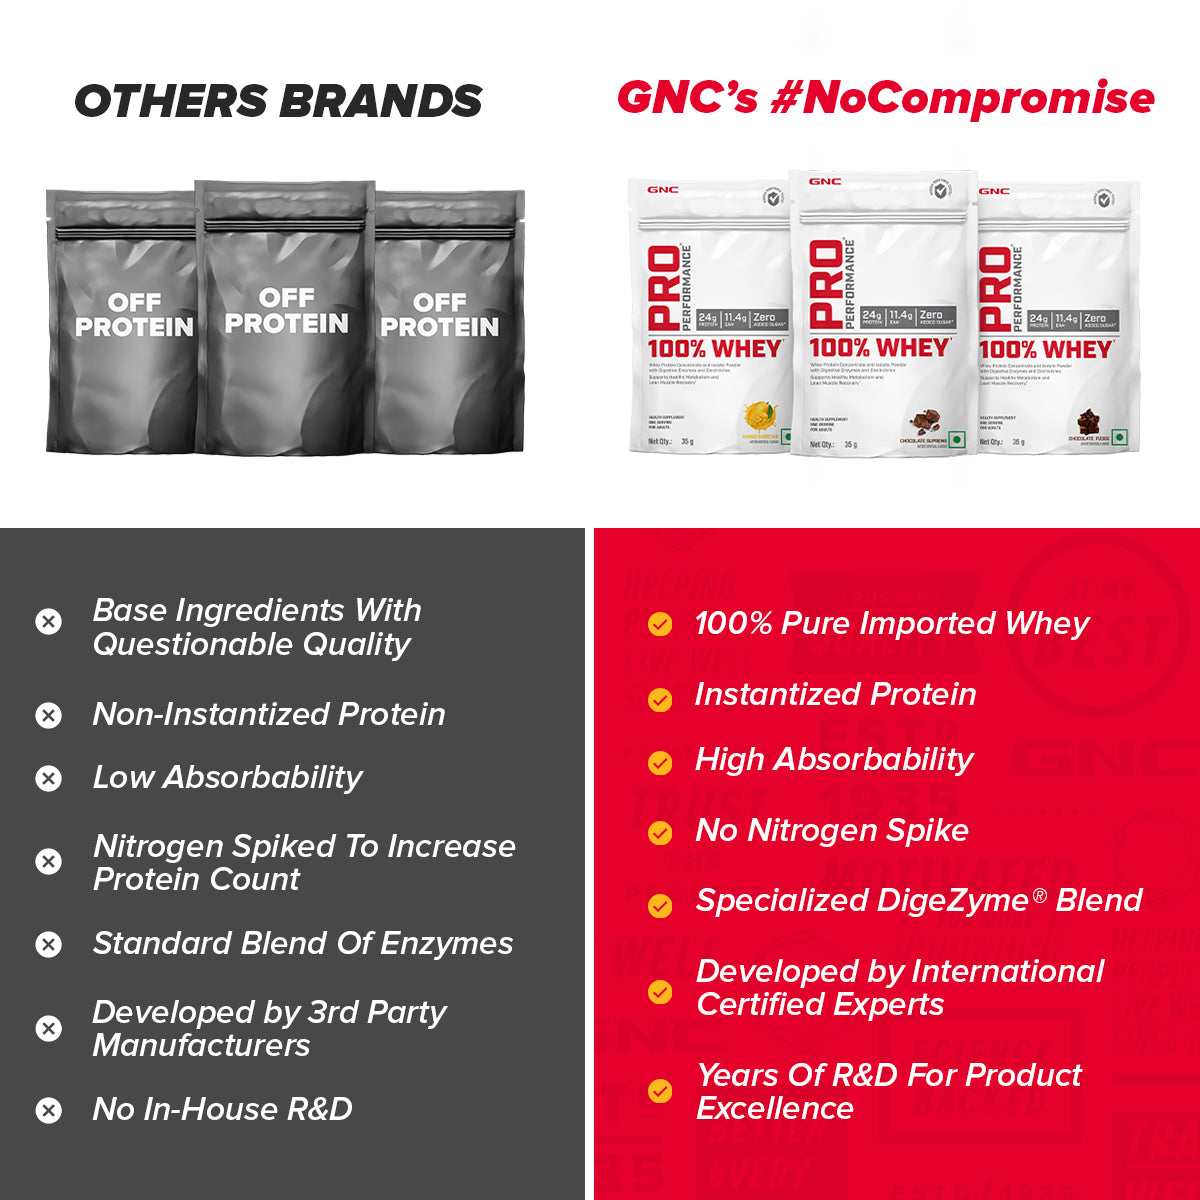 GNC Pro Performance 100% Whey Protein Taster Pack - 8 Delicious Flavors x 35gm Sachets